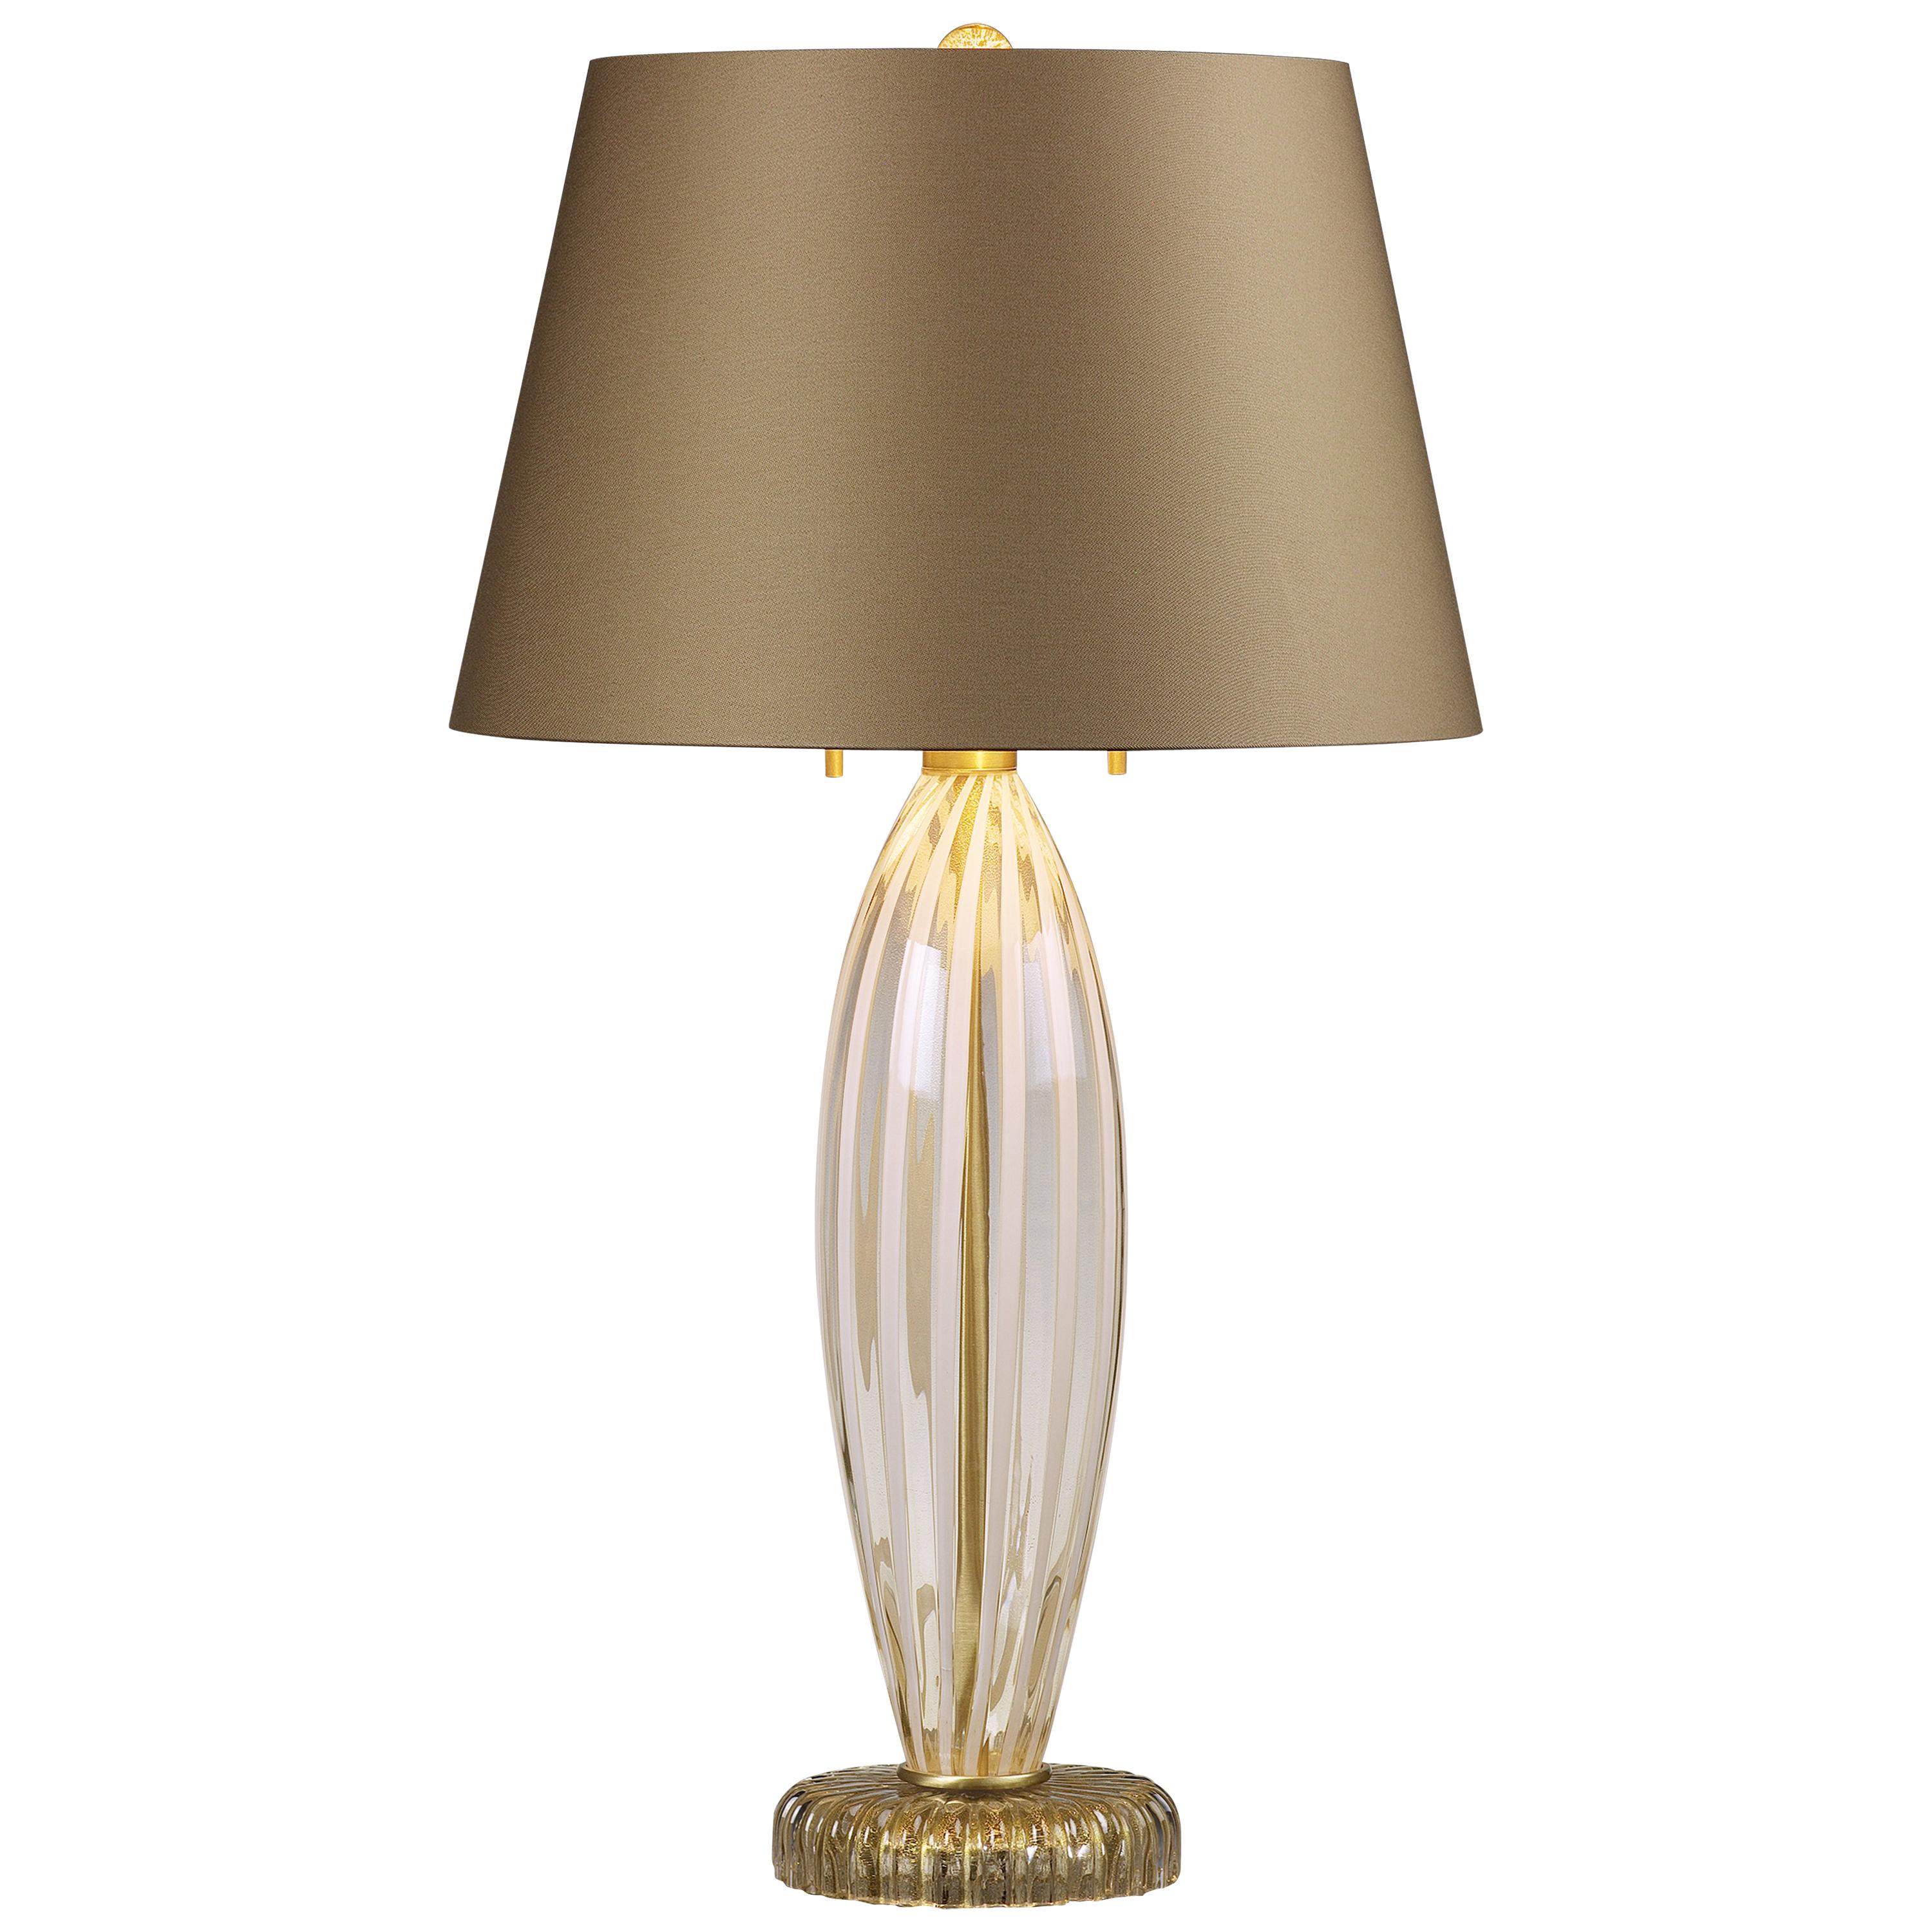 Donghia Bovolo Table Lamp and Shade, Murano Glass with Smoke Finish For Sale